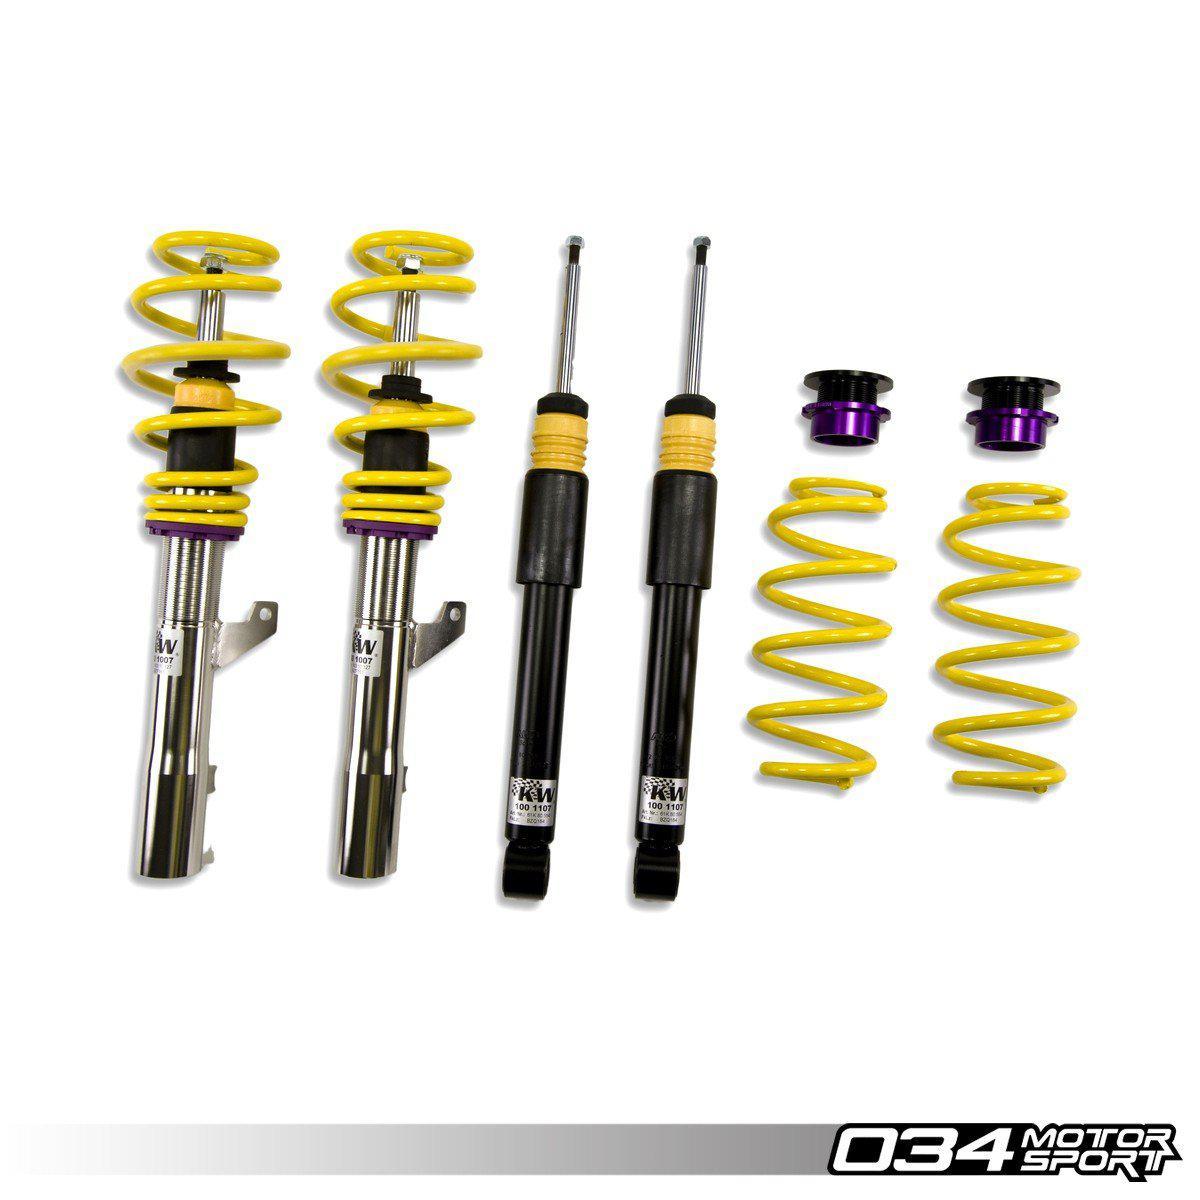 KW Variant 1 Coilover Suspension, 8p Audi A3 Quattro &amp; B6/B7 Volkswagen Passat Without Edc-A Little Tuning Co